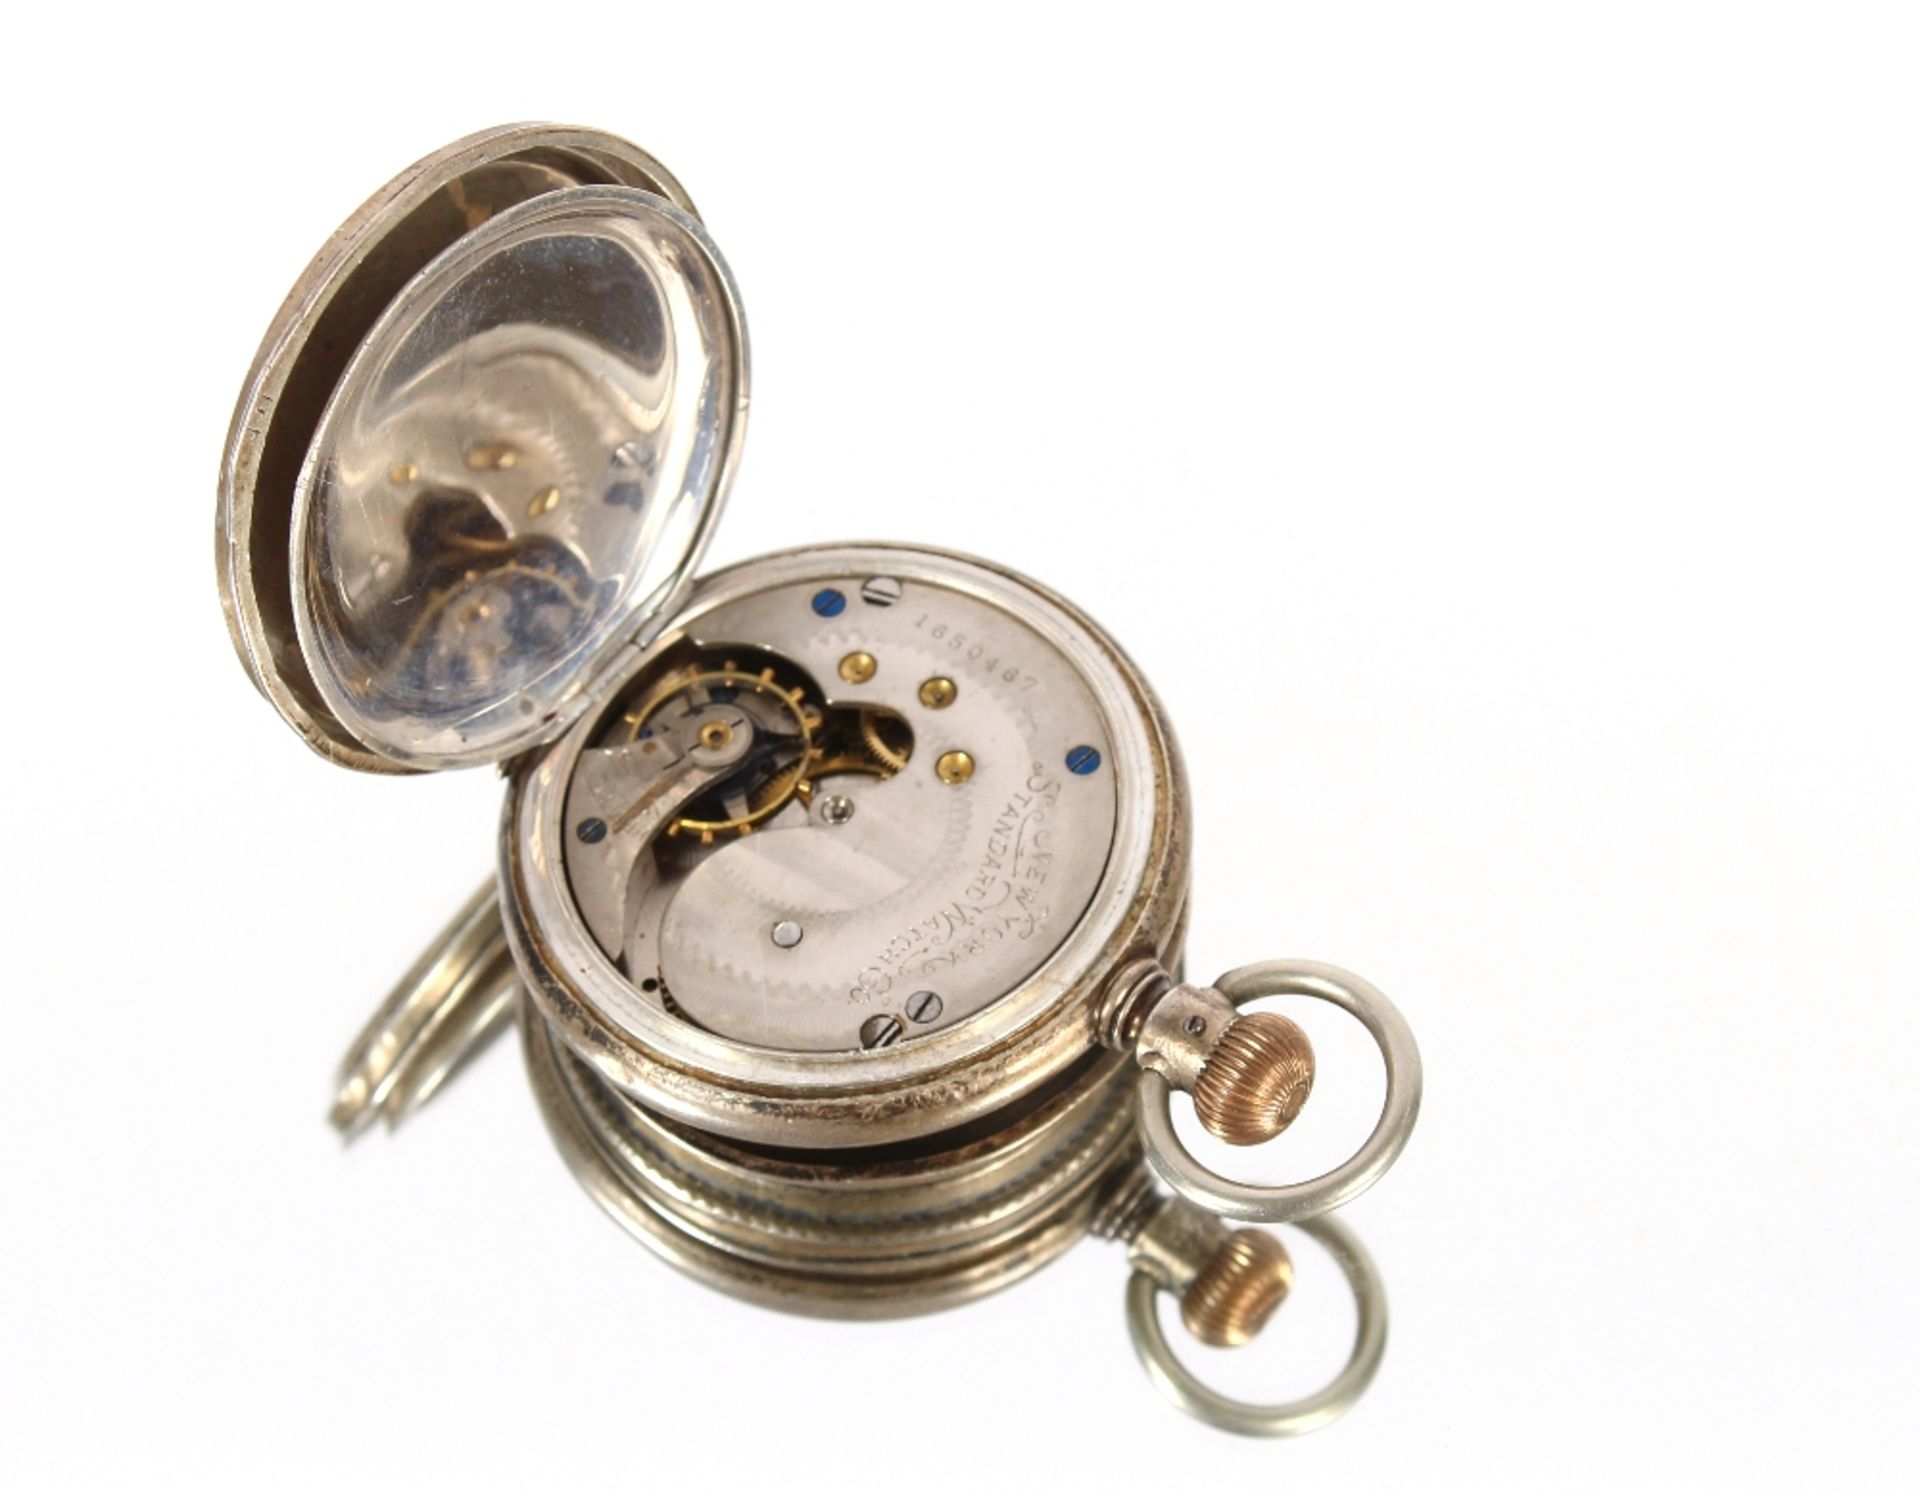 An American Standard Watch Co. of New York silver top wound pocket watch - Image 4 of 5